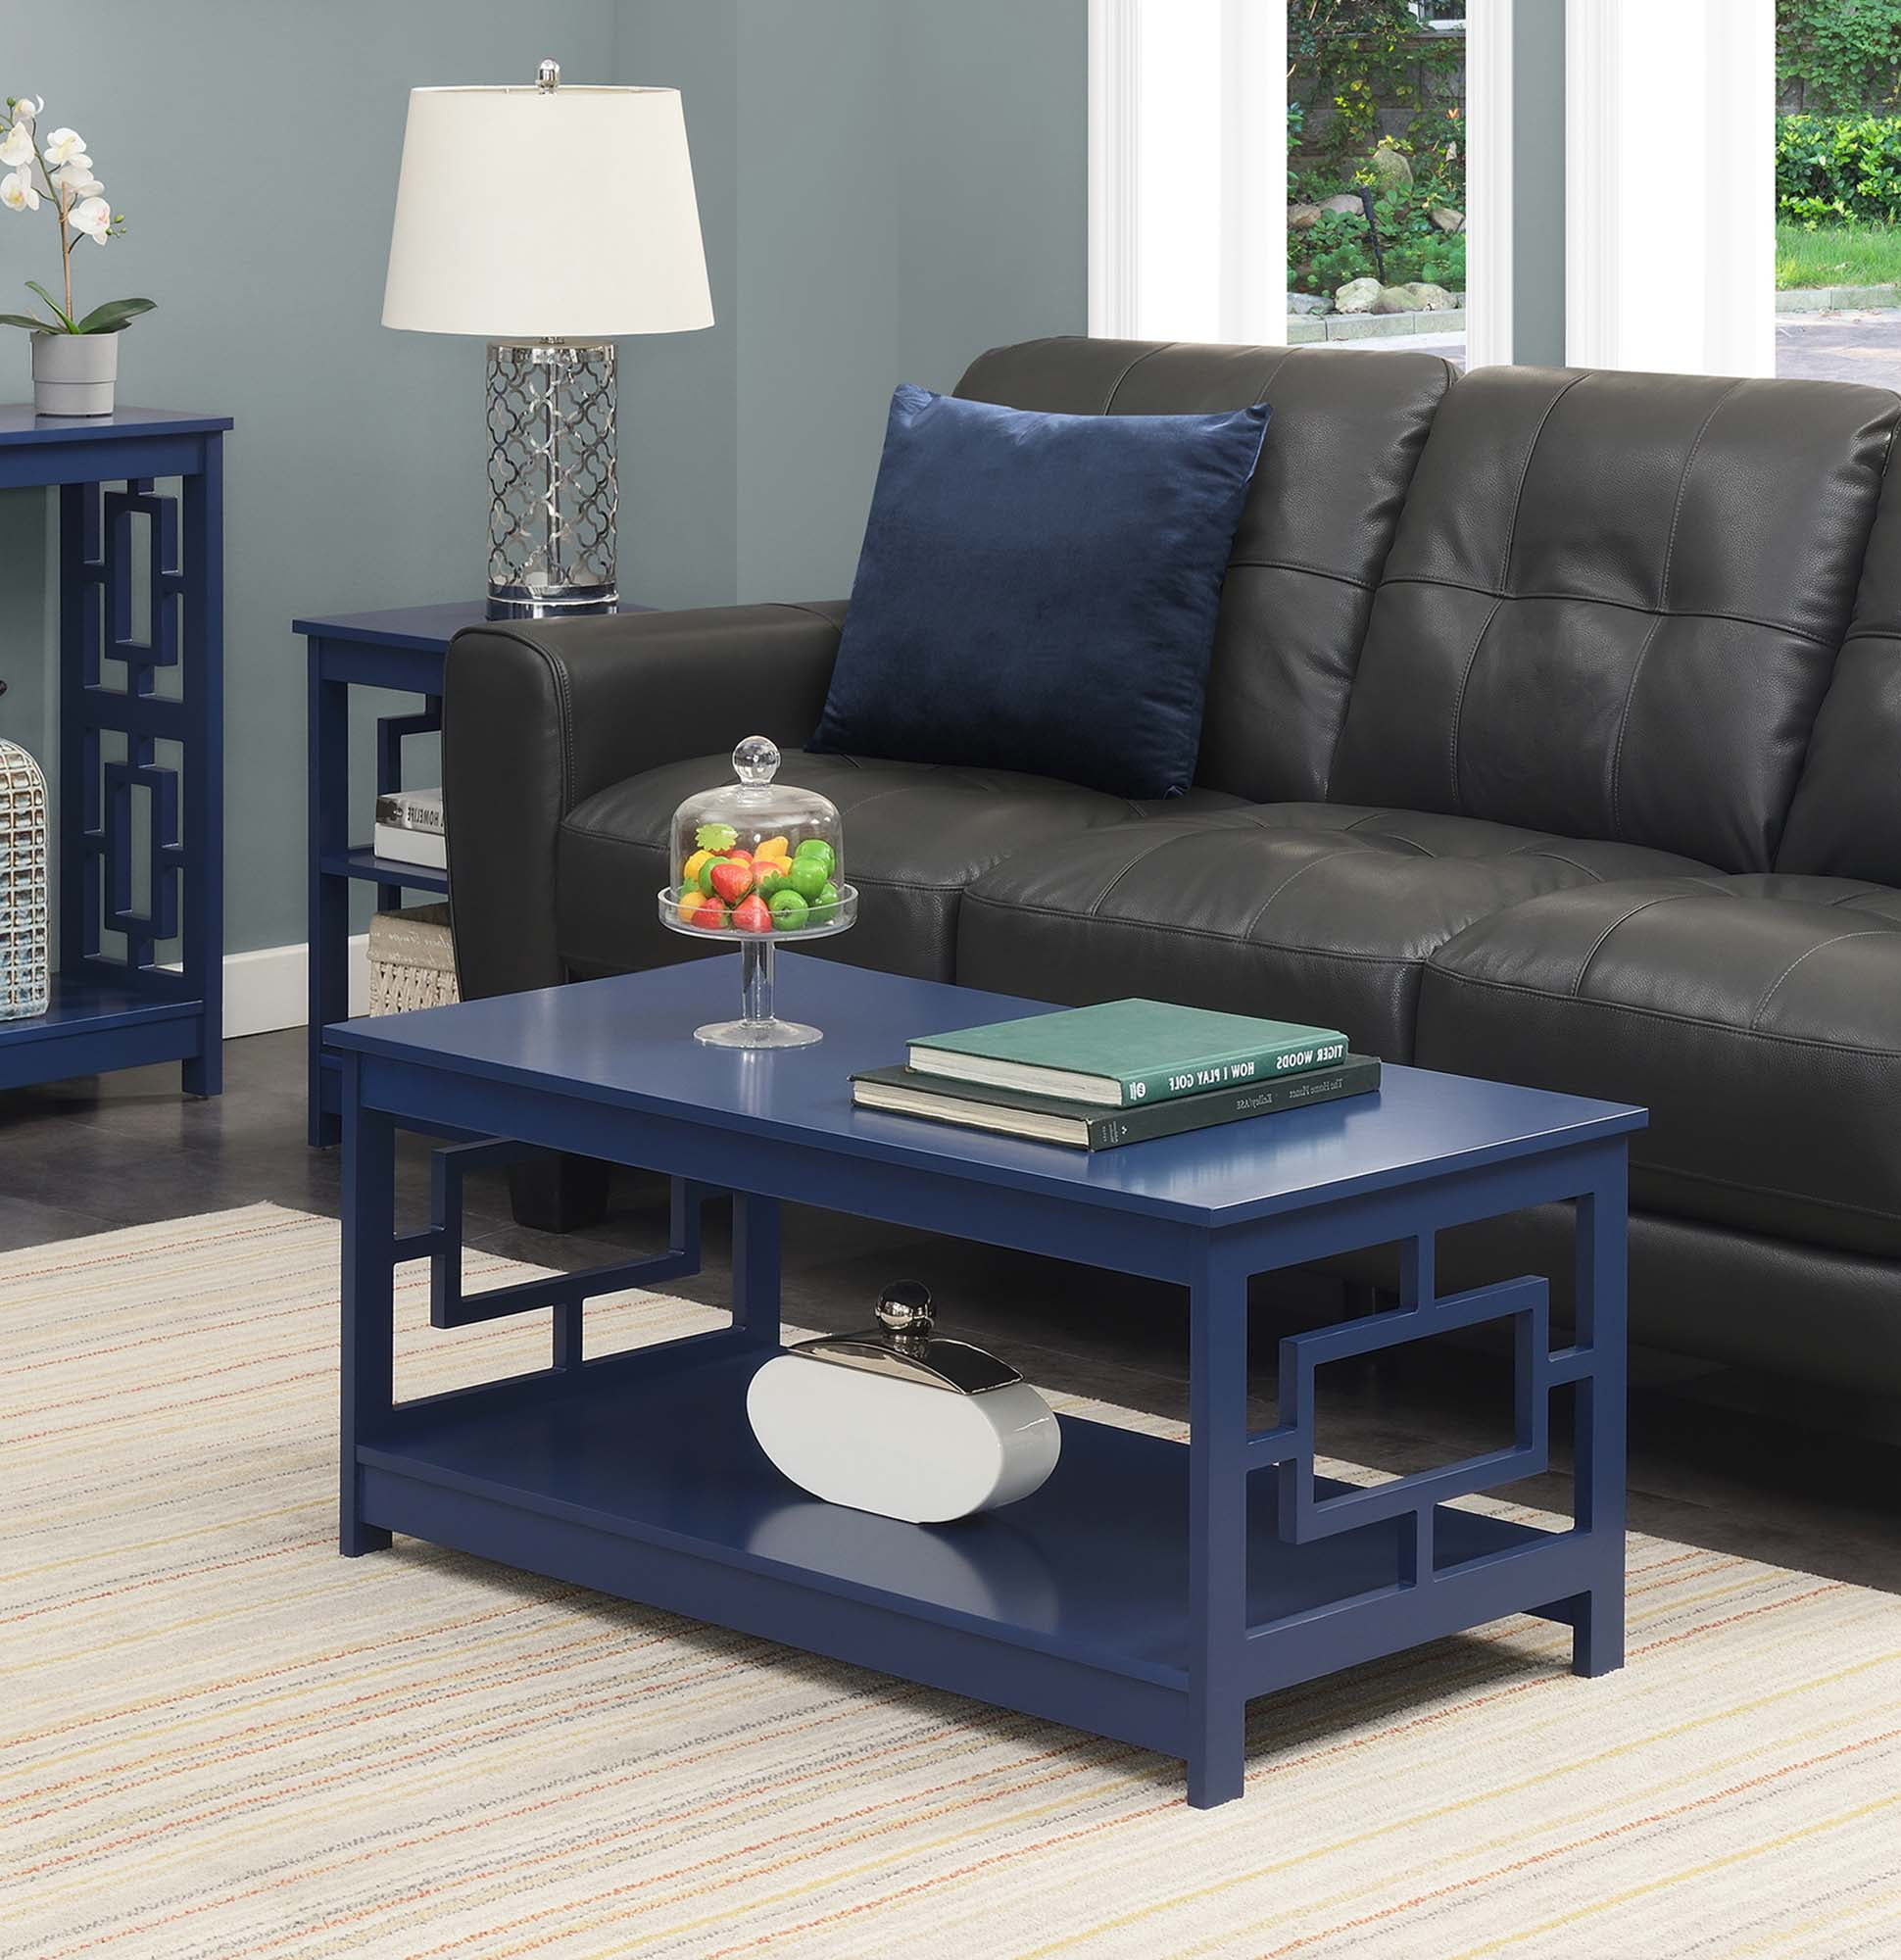 Convenience Concepts Town Square Coffee Table with Shelf, Cobalt Blue 